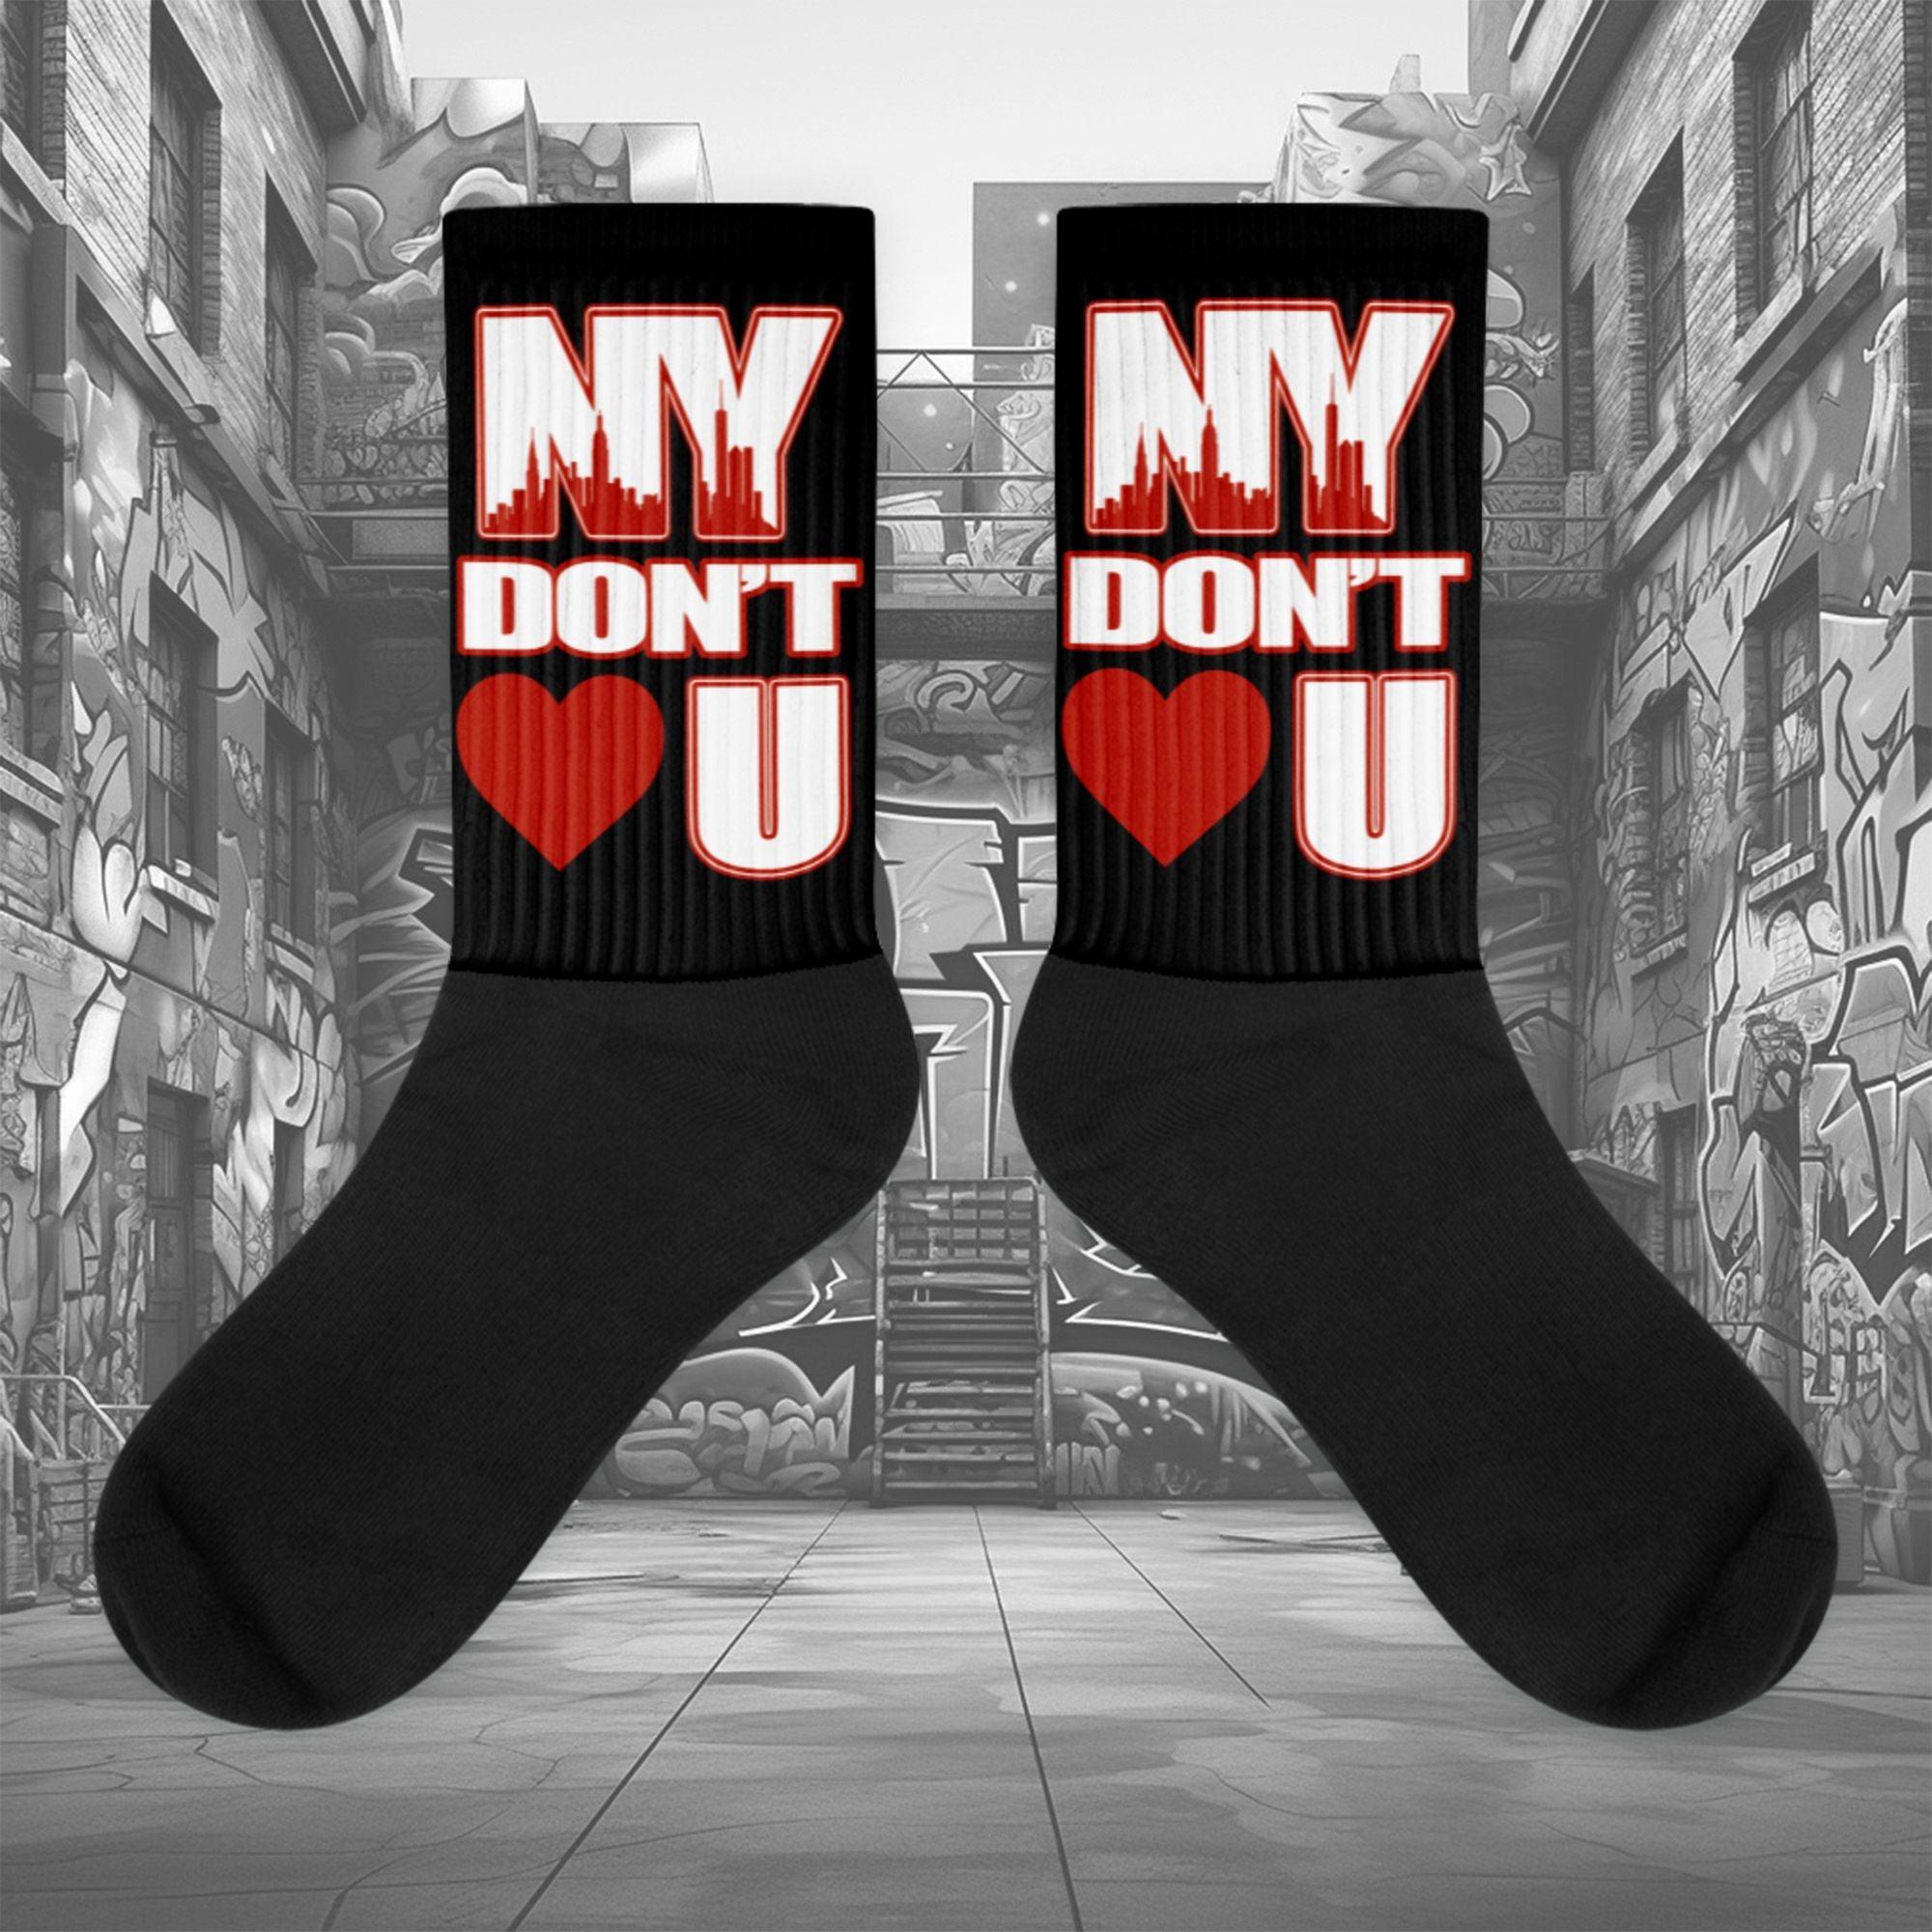  Showcases the view of the socks, highlighting the vibrant ' NY Don’t Love U ' design, which perfectly complements the Air Jordan 11 Cherry sneakers. The intricate pattern and color scheme inspired by the  theme are prominently displayed.  Focusing on the ribbed leg , cusioned bottoms and the snug fit of the socks. This angle provides a clear view of the texture and quality of the material blend.